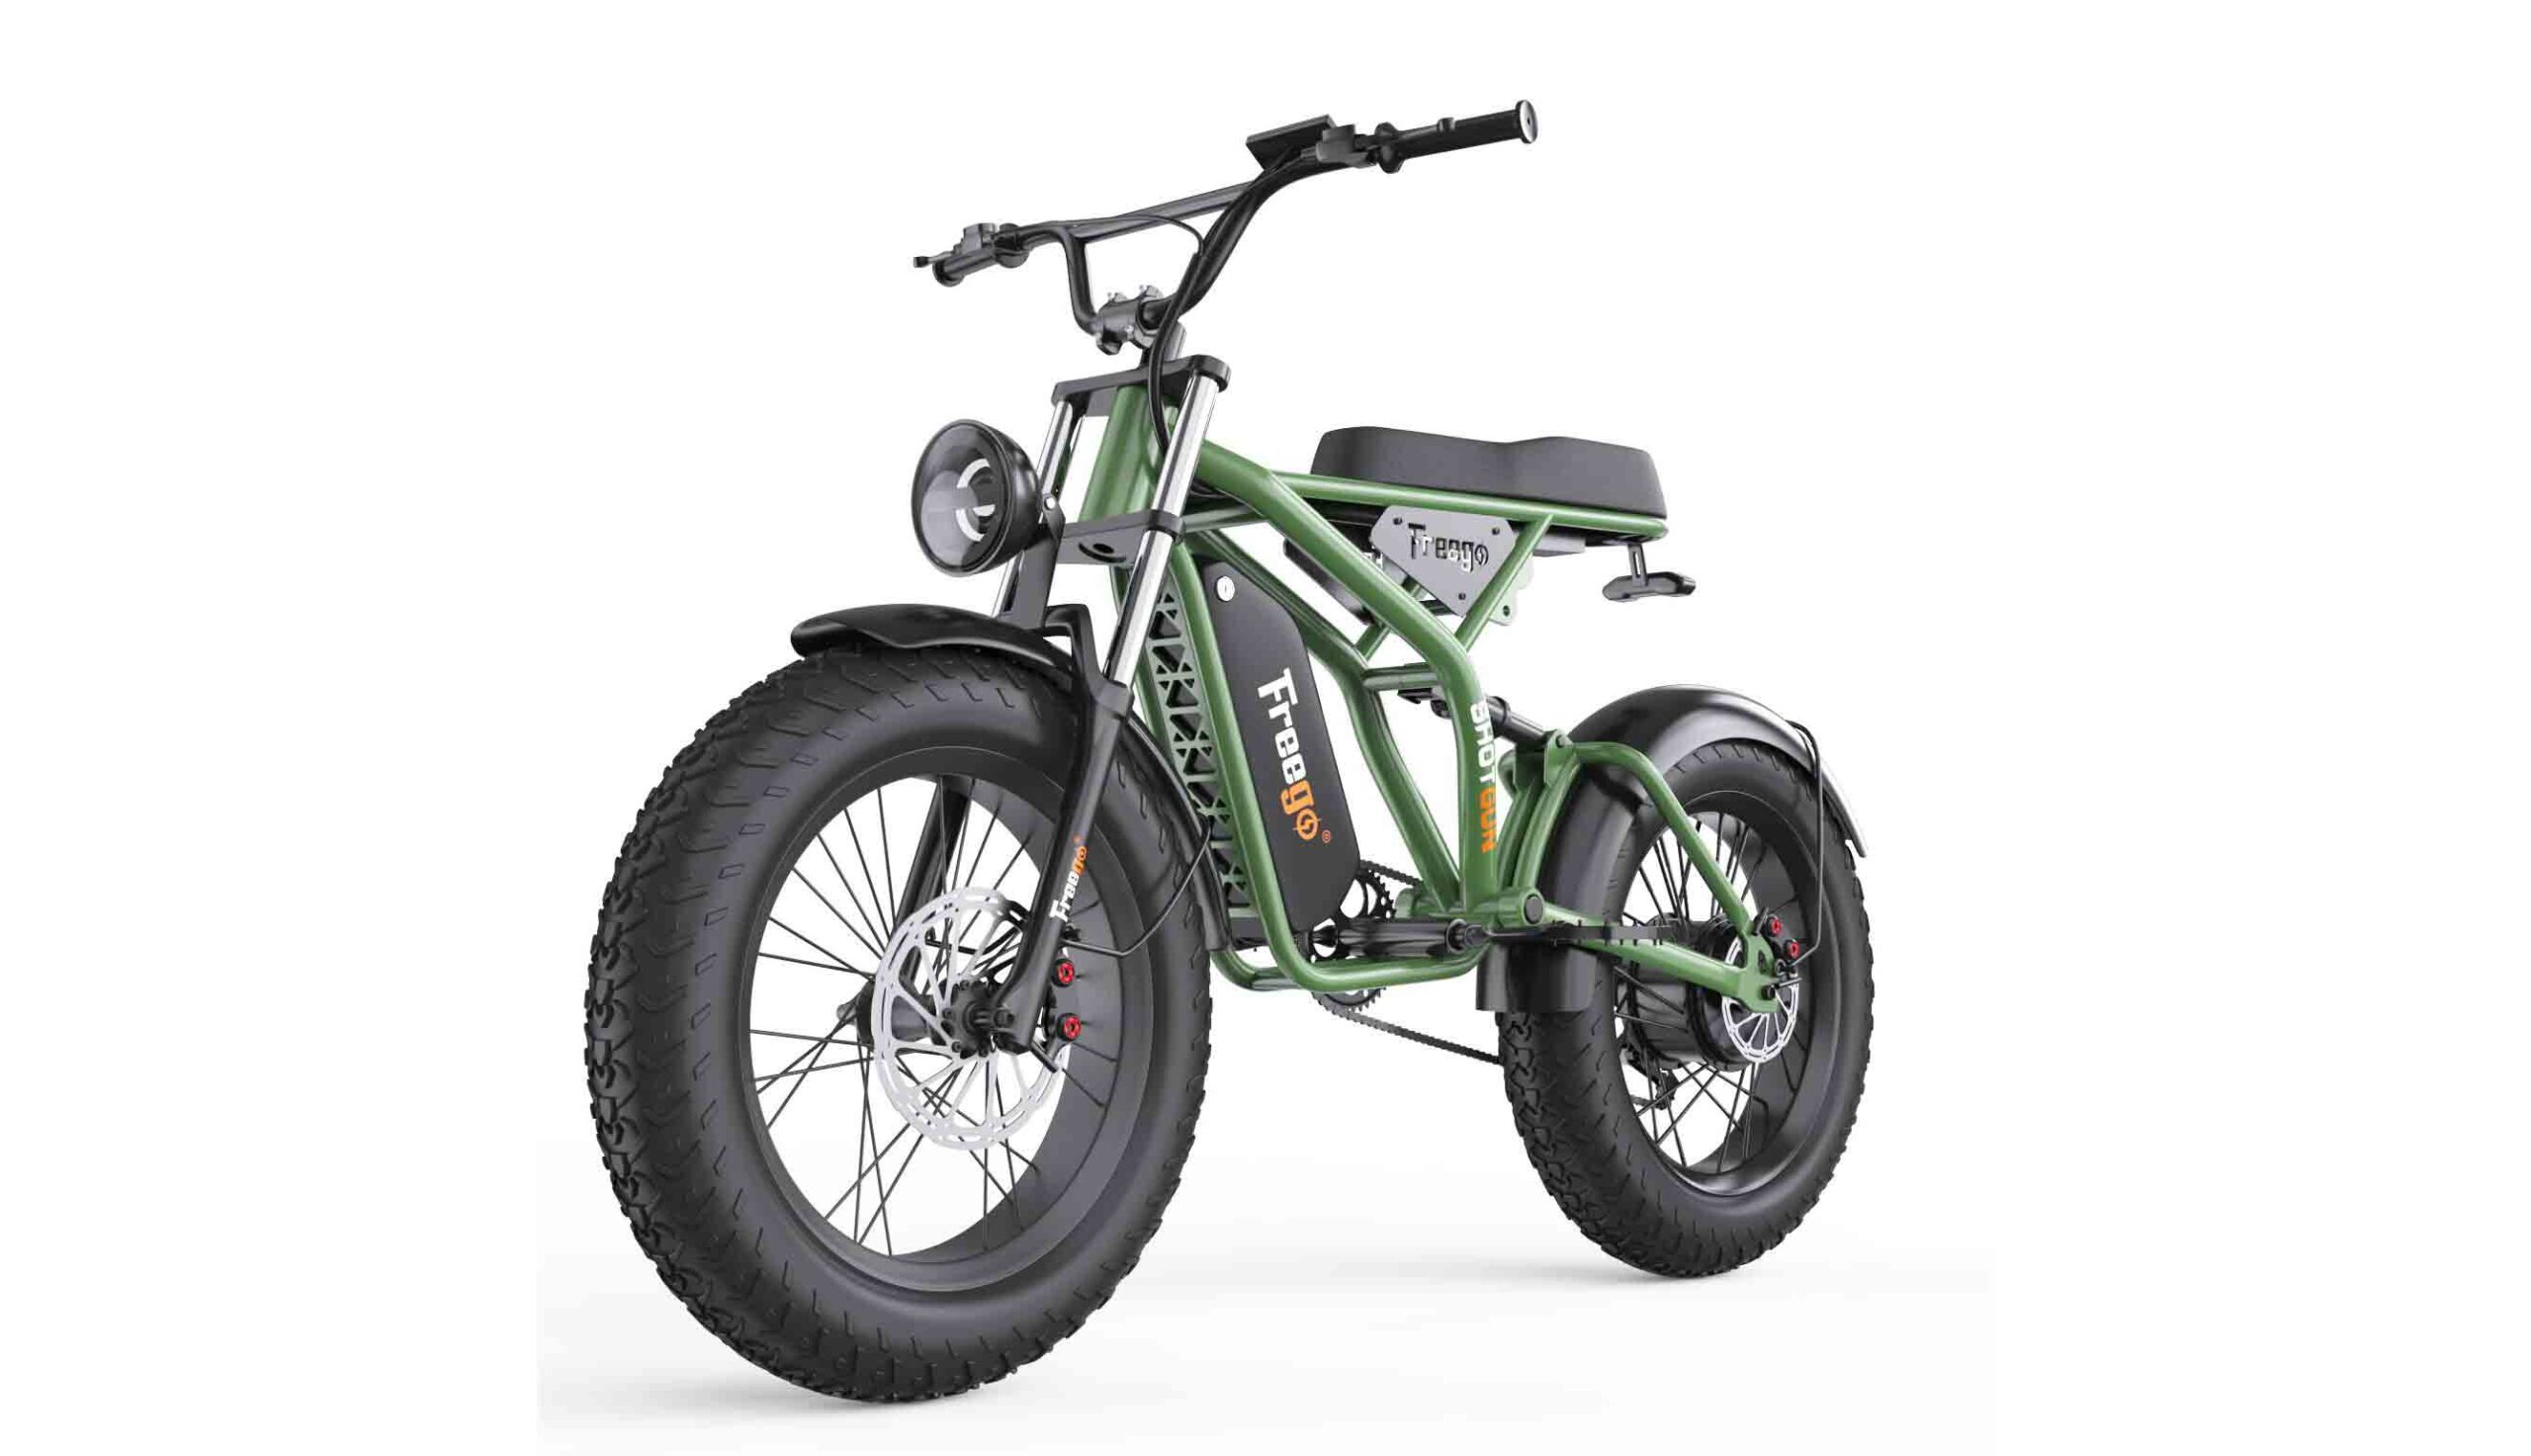 <strong>What Accessories or Additional Features Are Commonly Available for Electric Bikes?</strong><strong></strong>